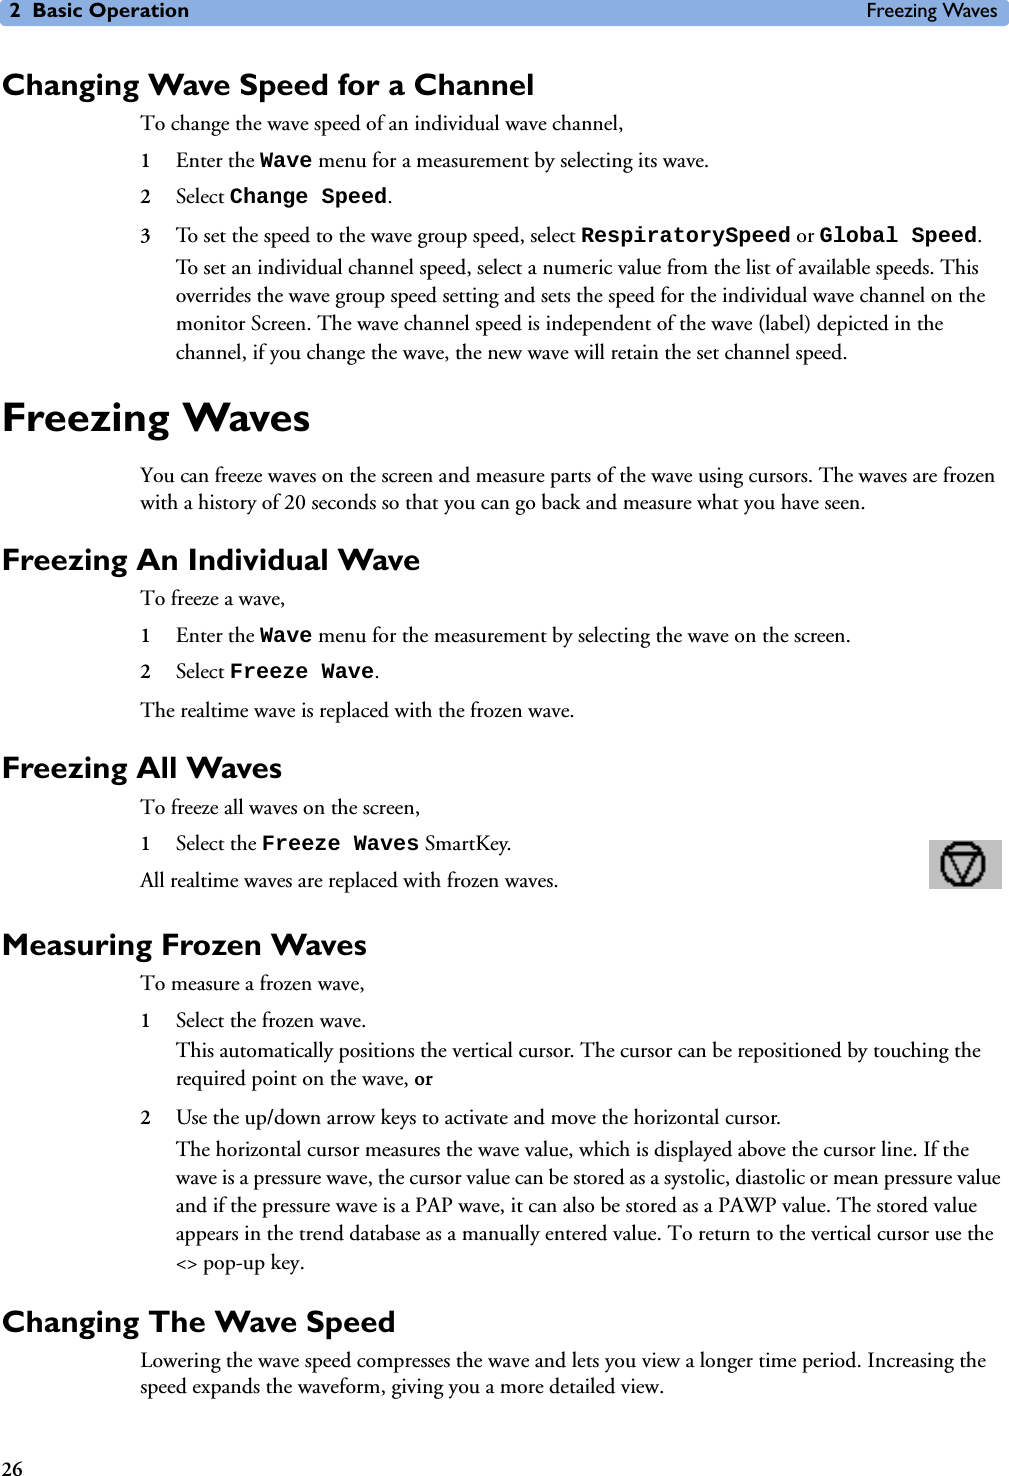 2 Basic Operation Freezing Waves26Changing Wave Speed for a ChannelTo change the wave speed of an individual wave channel, 1Enter the Wave menu for a measurement by selecting its wave.2Select Change Speed.3To set the speed to the wave group speed, select RespiratorySpeed or Global Speed. To set an individual channel speed, select a numeric value from the list of available speeds. This overrides the wave group speed setting and sets the speed for the individual wave channel on the monitor Screen. The wave channel speed is independent of the wave (label) depicted in the channel, if you change the wave, the new wave will retain the set channel speed.Freezing WavesYou can freeze waves on the screen and measure parts of the wave using cursors. The waves are frozen with a history of 20 seconds so that you can go back and measure what you have seen. Freezing An Individual WaveTo freeze a wave,1Enter the Wave menu for the measurement by selecting the wave on the screen.2Select Freeze Wave.The realtime wave is replaced with the frozen wave. Freezing All WavesTo freeze all waves on the screen,1Select the Freeze Waves SmartKey.All realtime waves are replaced with frozen waves. Measuring Frozen WavesTo measure a frozen wave,1Select the frozen wave.This automatically positions the vertical cursor. The cursor can be repositioned by touching the required point on the wave, or 2Use the up/down arrow keys to activate and move the horizontal cursor. The horizontal cursor measures the wave value, which is displayed above the cursor line. If the wave is a pressure wave, the cursor value can be stored as a systolic, diastolic or mean pressure value and if the pressure wave is a PAP wave, it can also be stored as a PAWP value. The stored value appears in the trend database as a manually entered value. To return to the vertical cursor use the &lt;&gt; pop-up key.Changing The Wave SpeedLowering the wave speed compresses the wave and lets you view a longer time period. Increasing the speed expands the waveform, giving you a more detailed view.